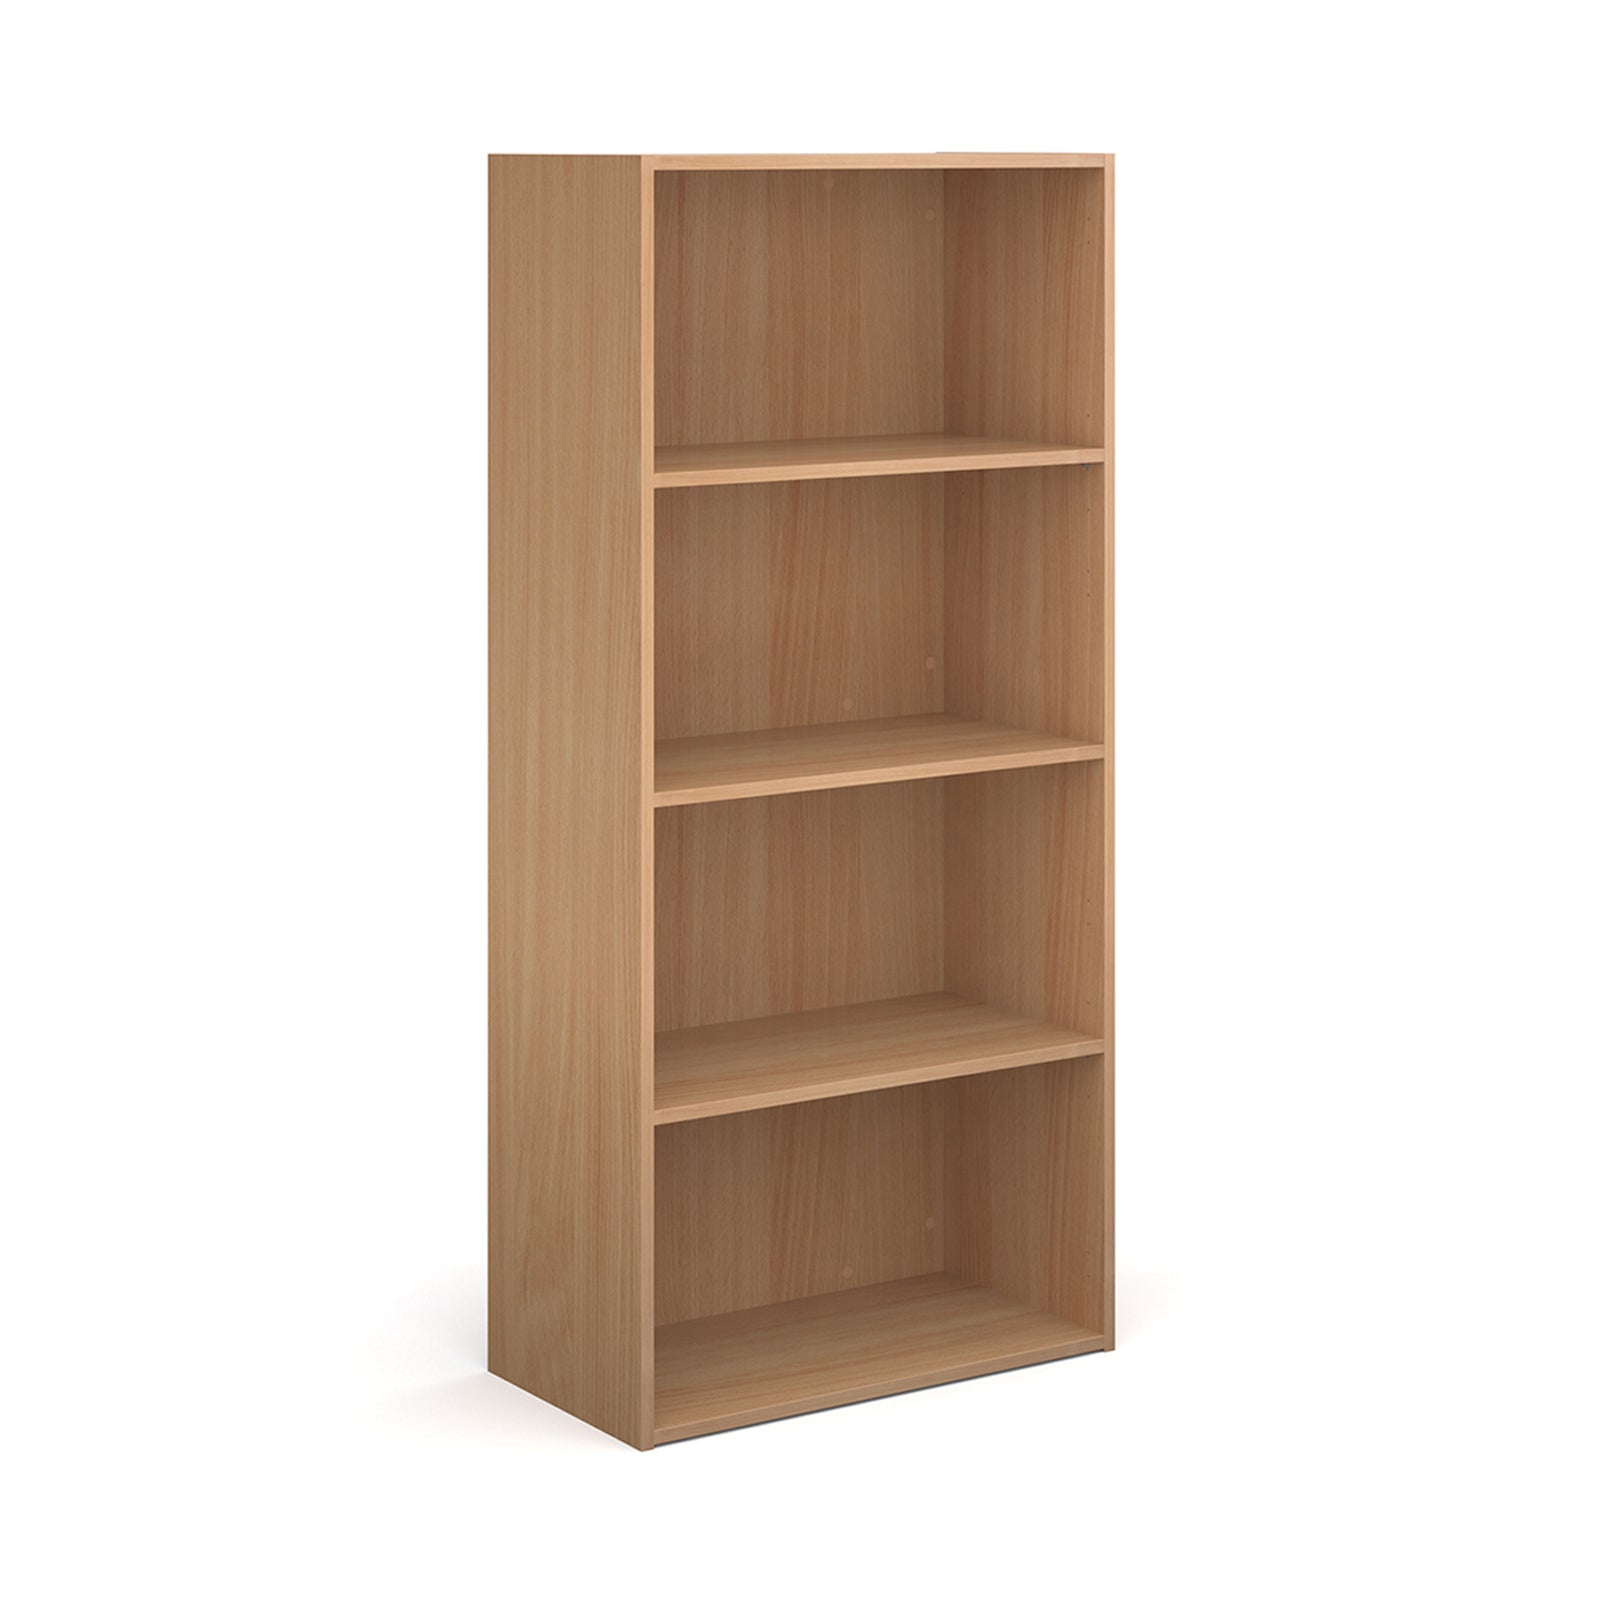 Contract One, Two, Three or Four Shelf 756mm Wide Bookcase